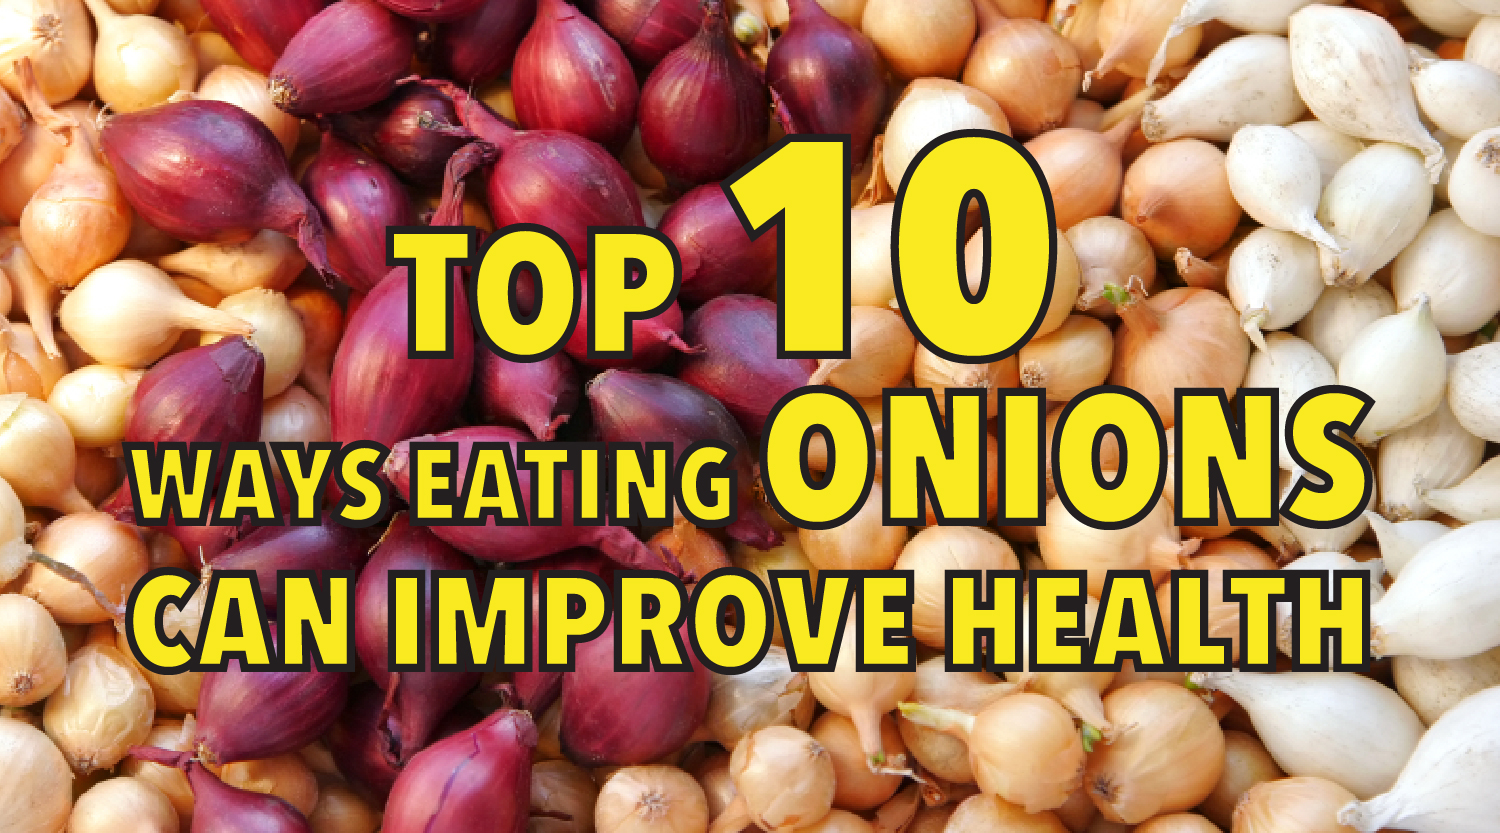 Top 10 ways eating onions can improve health